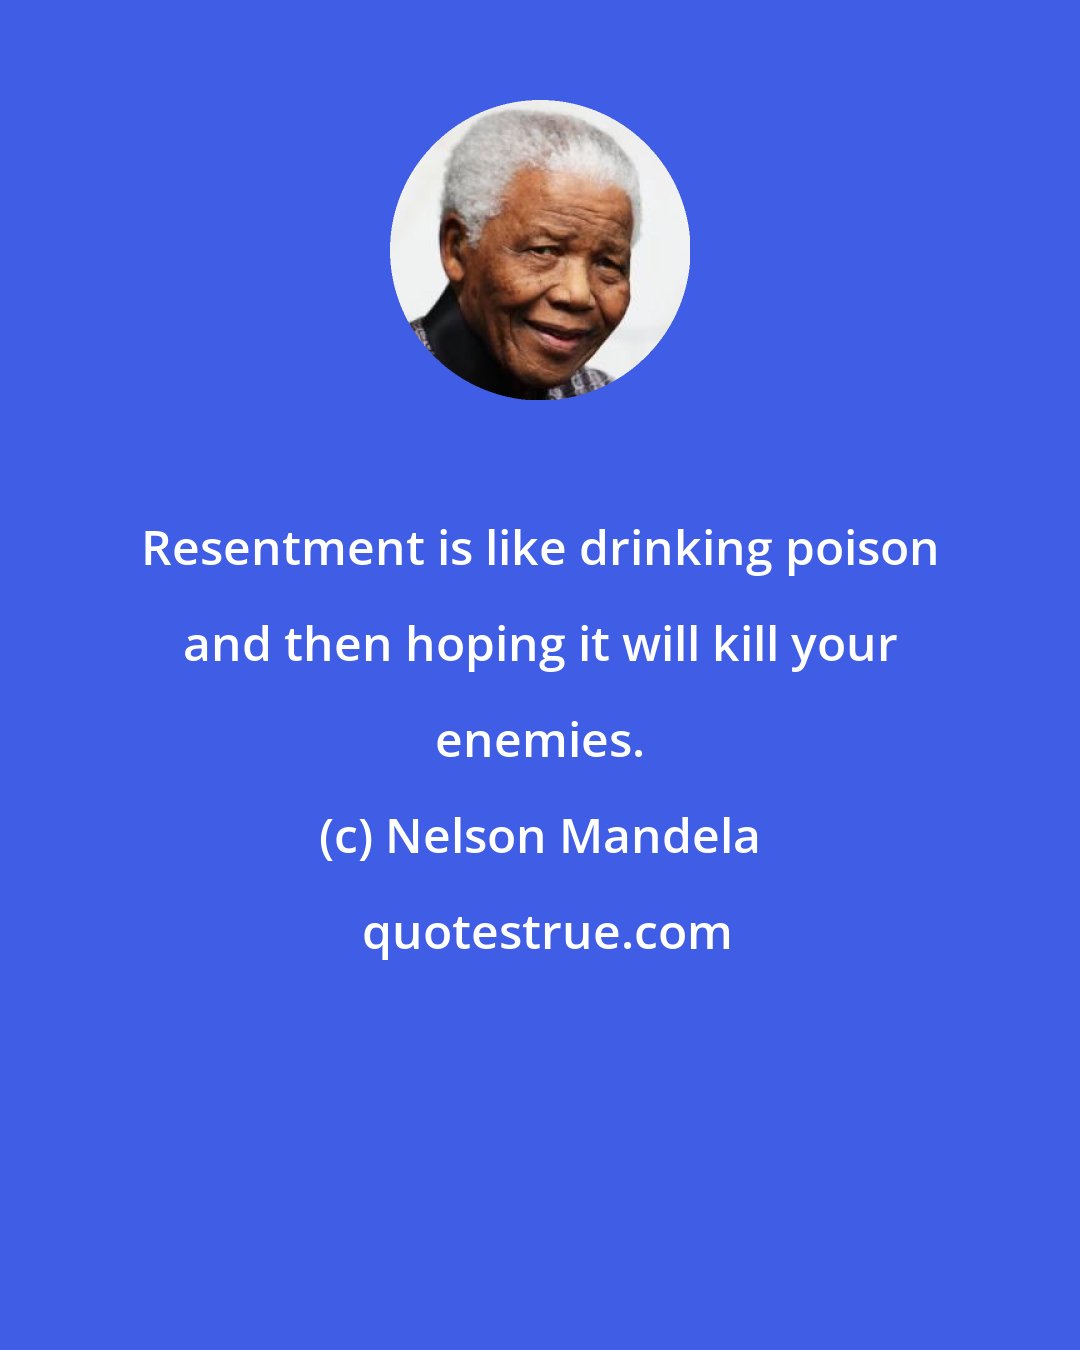 Nelson Mandela: Resentment is like drinking poison and then hoping it will kill your enemies.